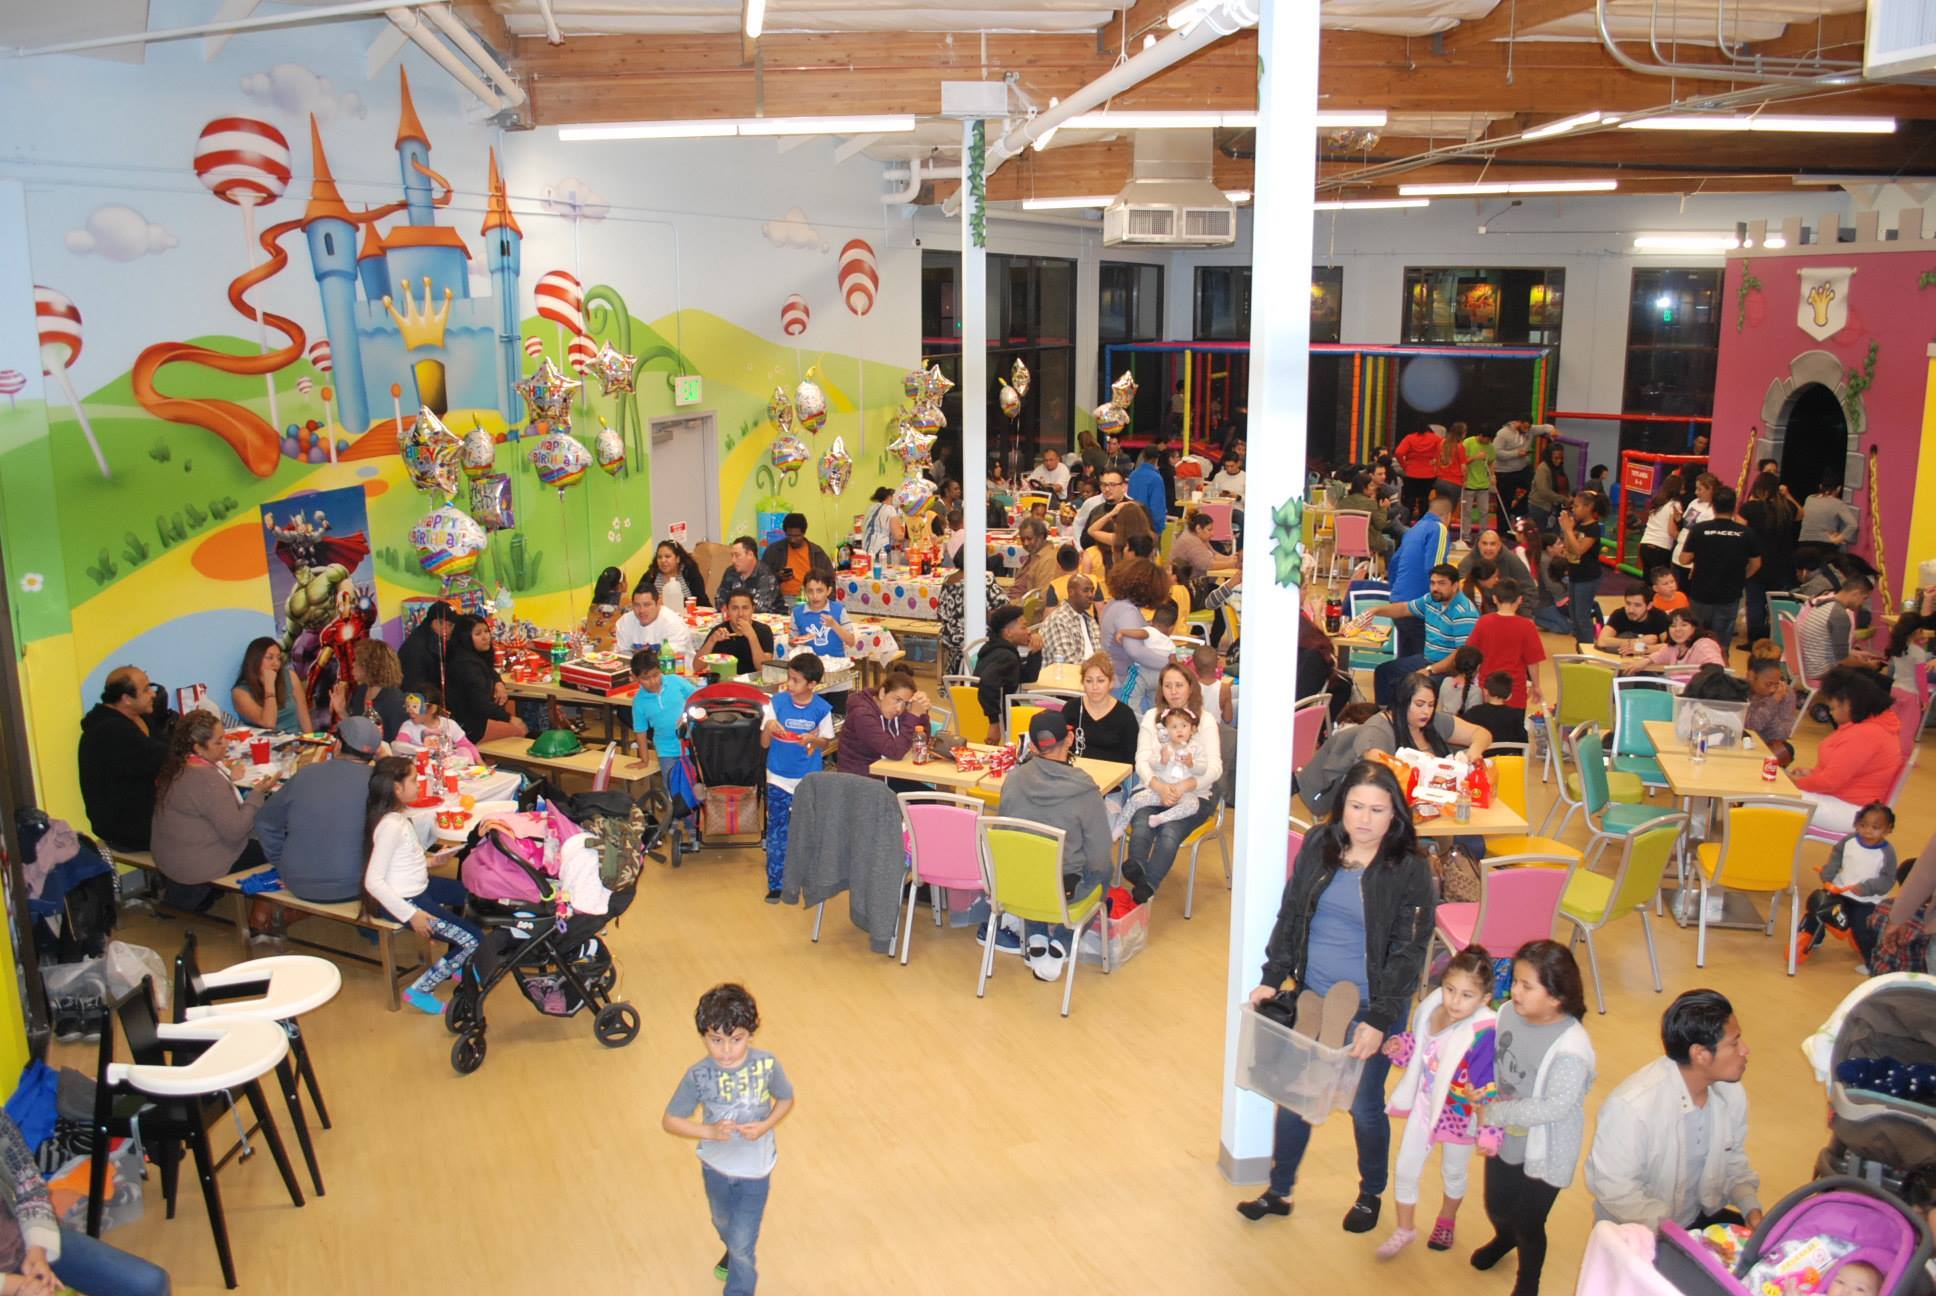 The Kids Empire in Mesquite, Texas, offers space for parties.